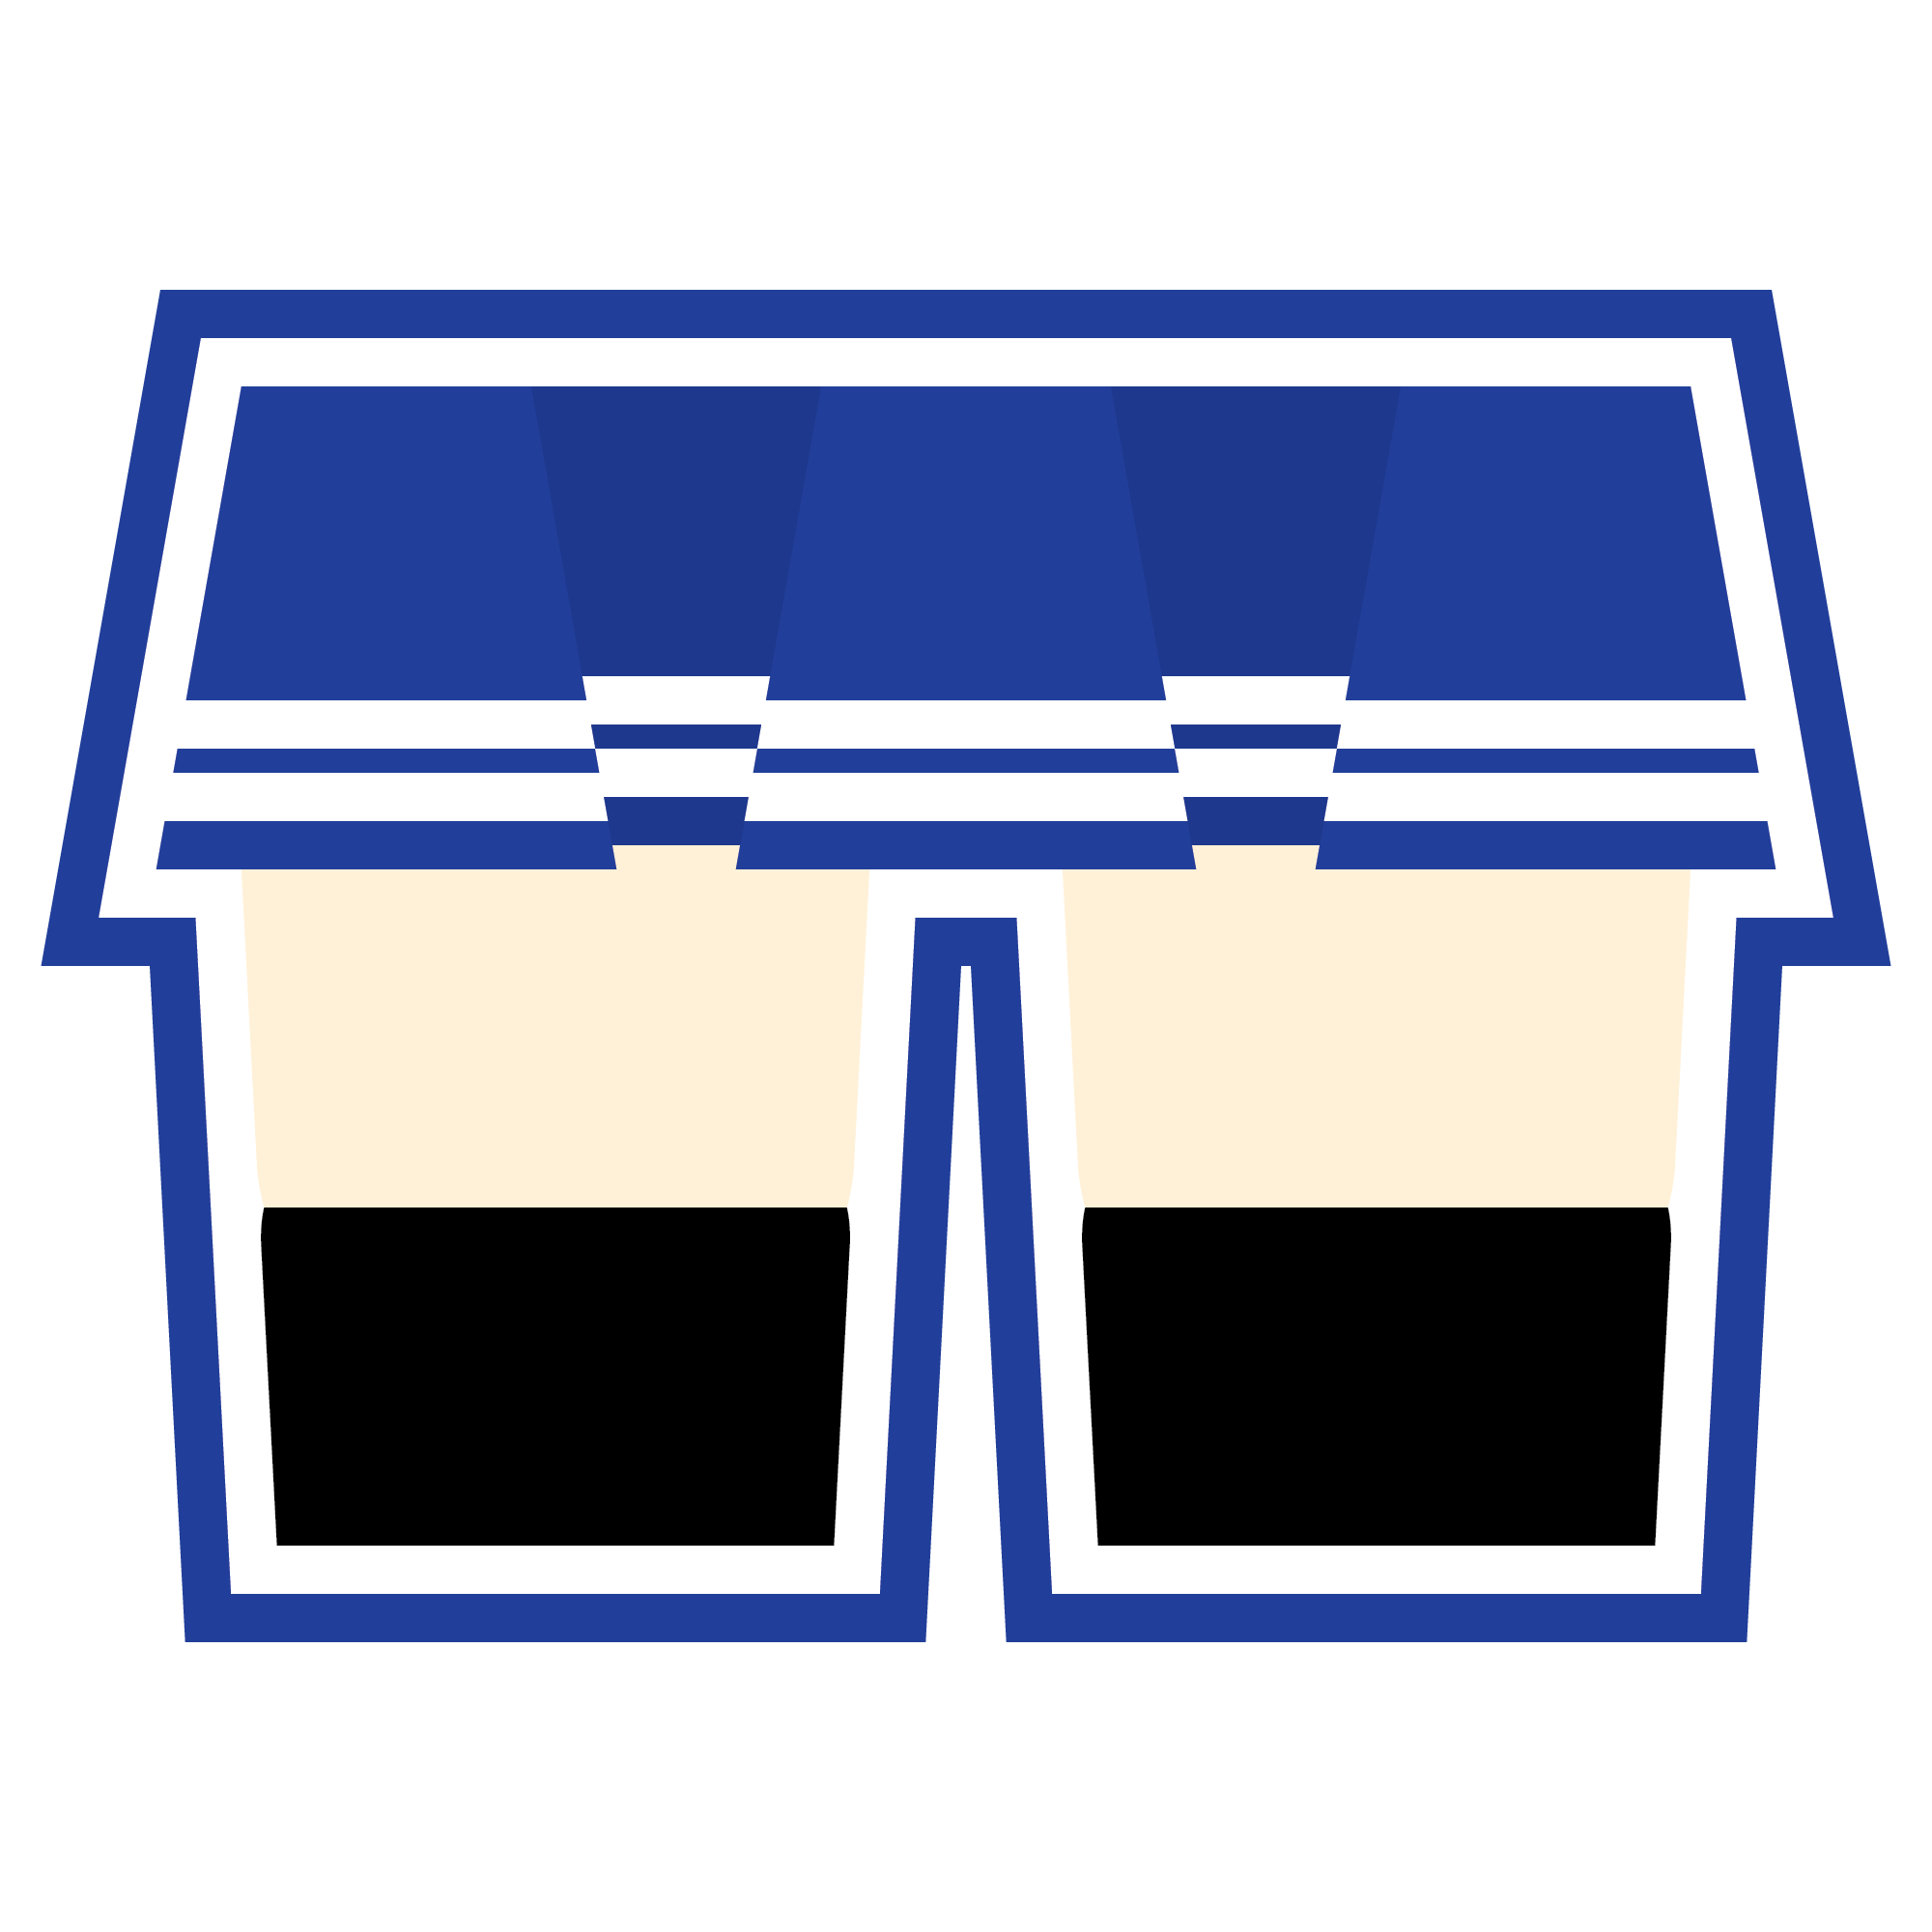 Absolute Territory. Ken Ashcorp Kenny absolute Territory. Absolute Territory Art. Absolute Territory арты. Песня absolute territory